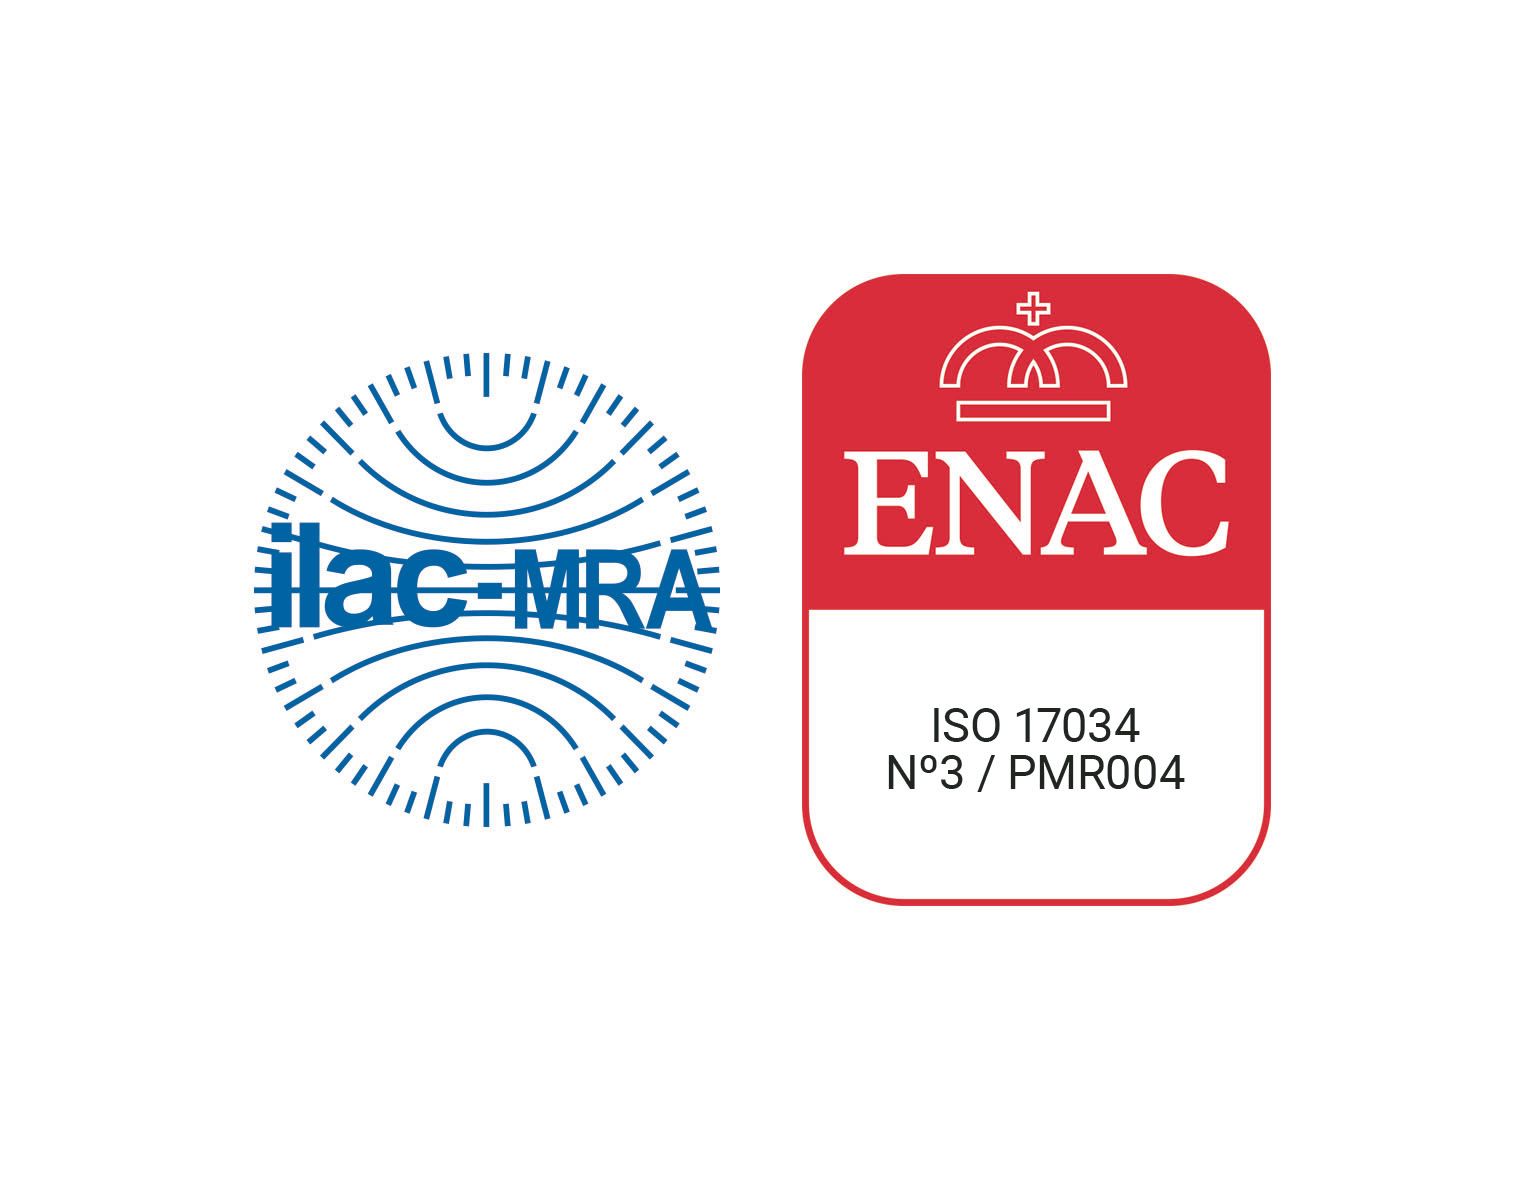 ISC Science is a Reference Material Producer accredited by ENAC with accreditation no. 3/PMR 004.  ENAC is a signatory to the EA and ILAC Multilateral Agreements for Reference Material Producers.